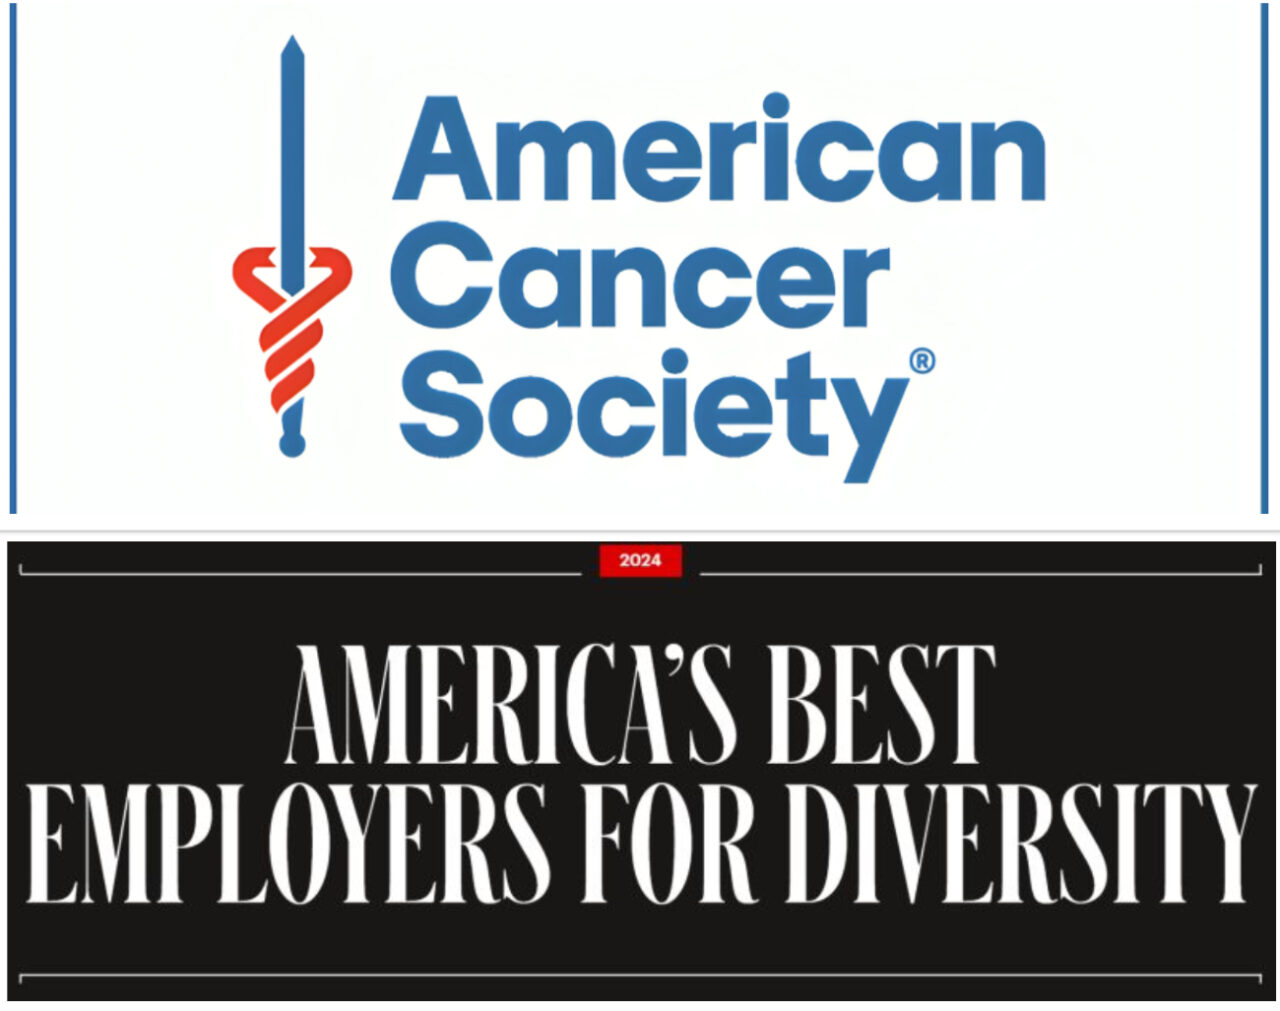 Karen Knudsen: American Cancer Society has been recognized by Forbes as one of America’s Best Employers for Diversity